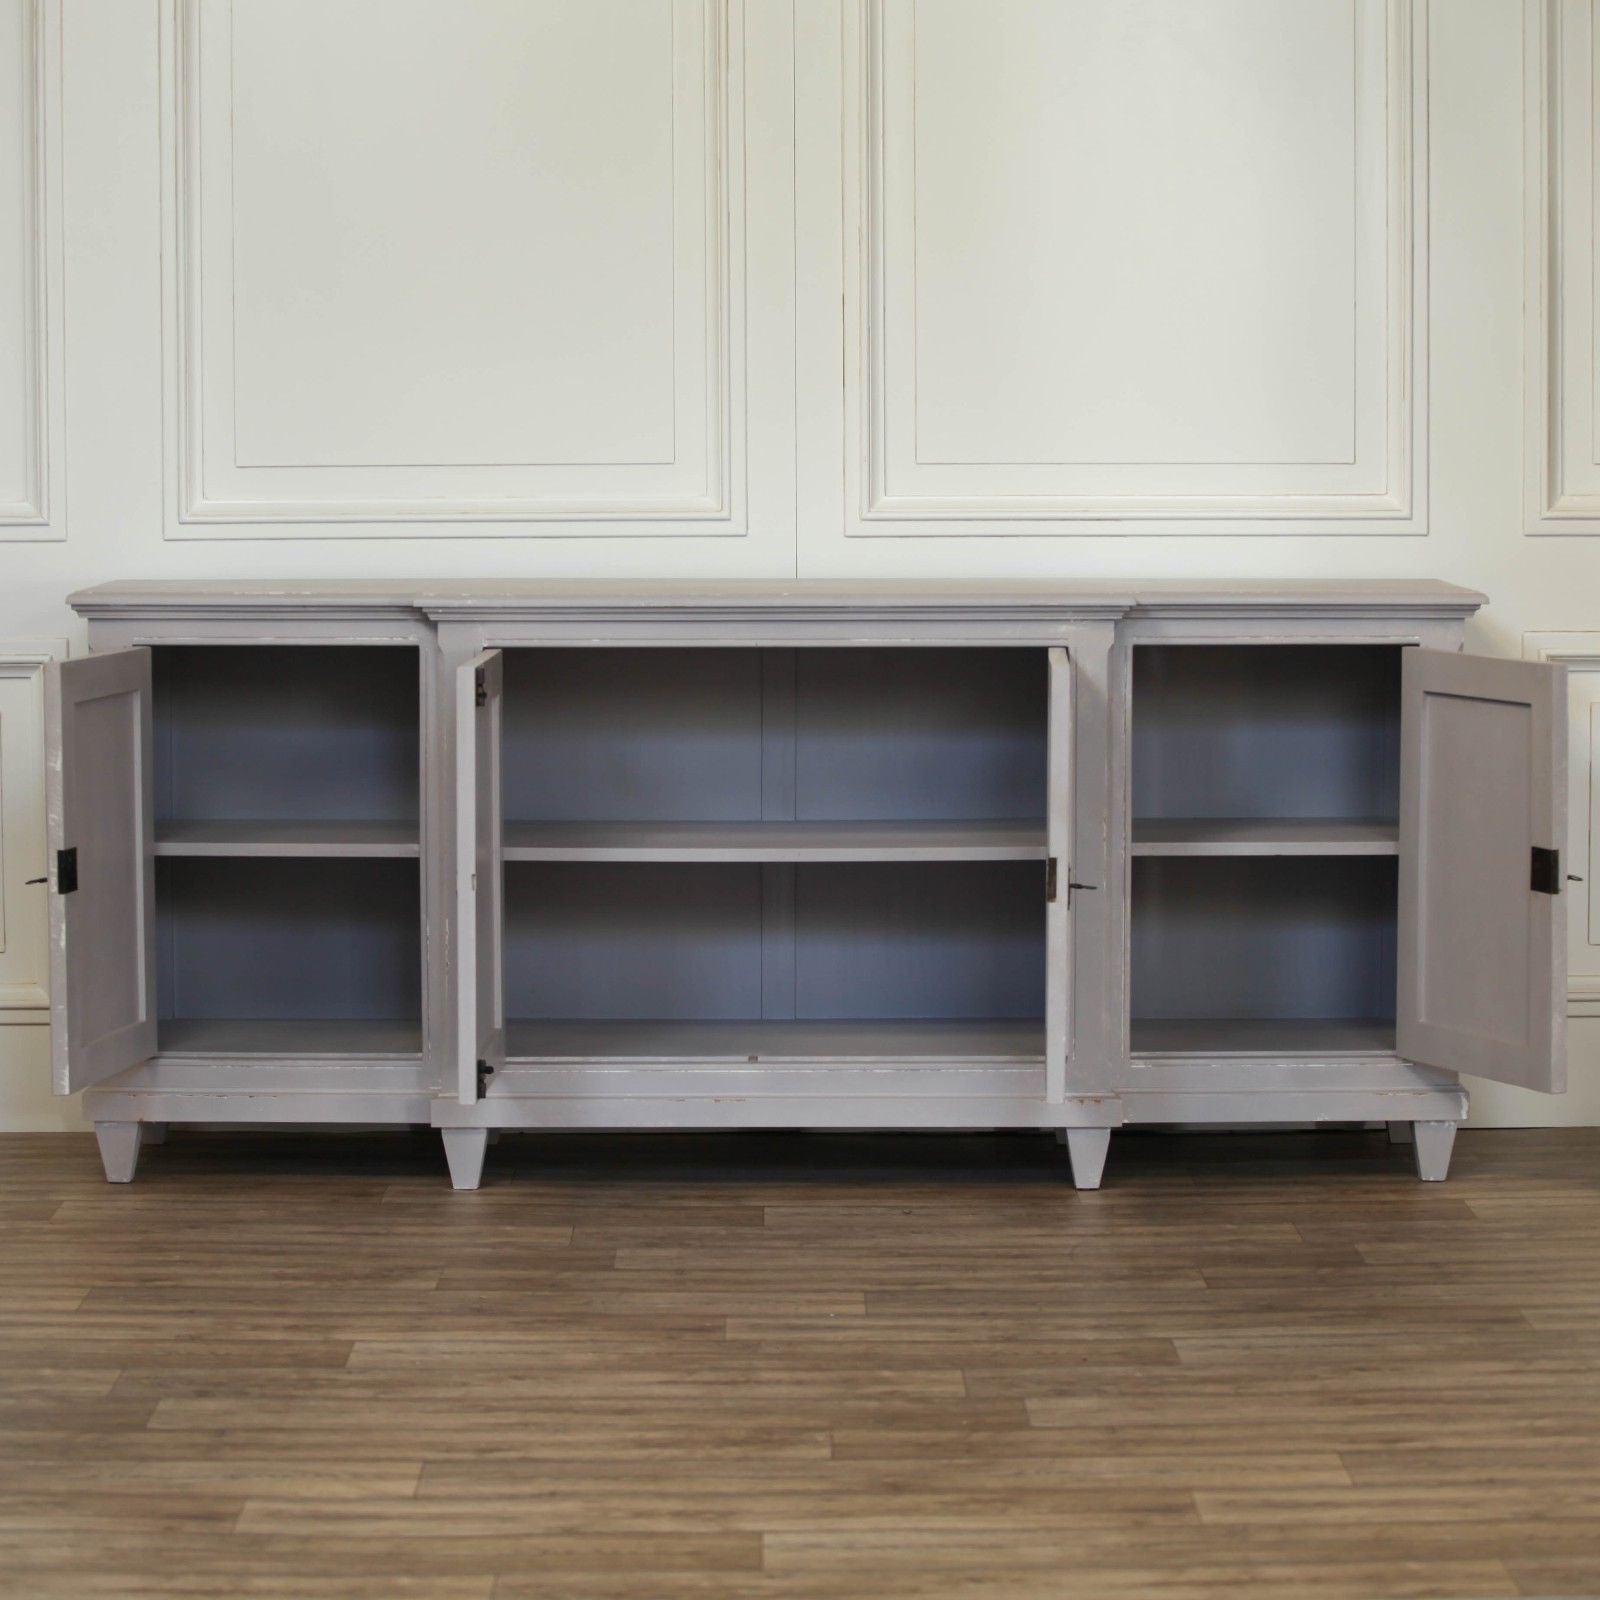 Classical Distressed Sideboard 206cm